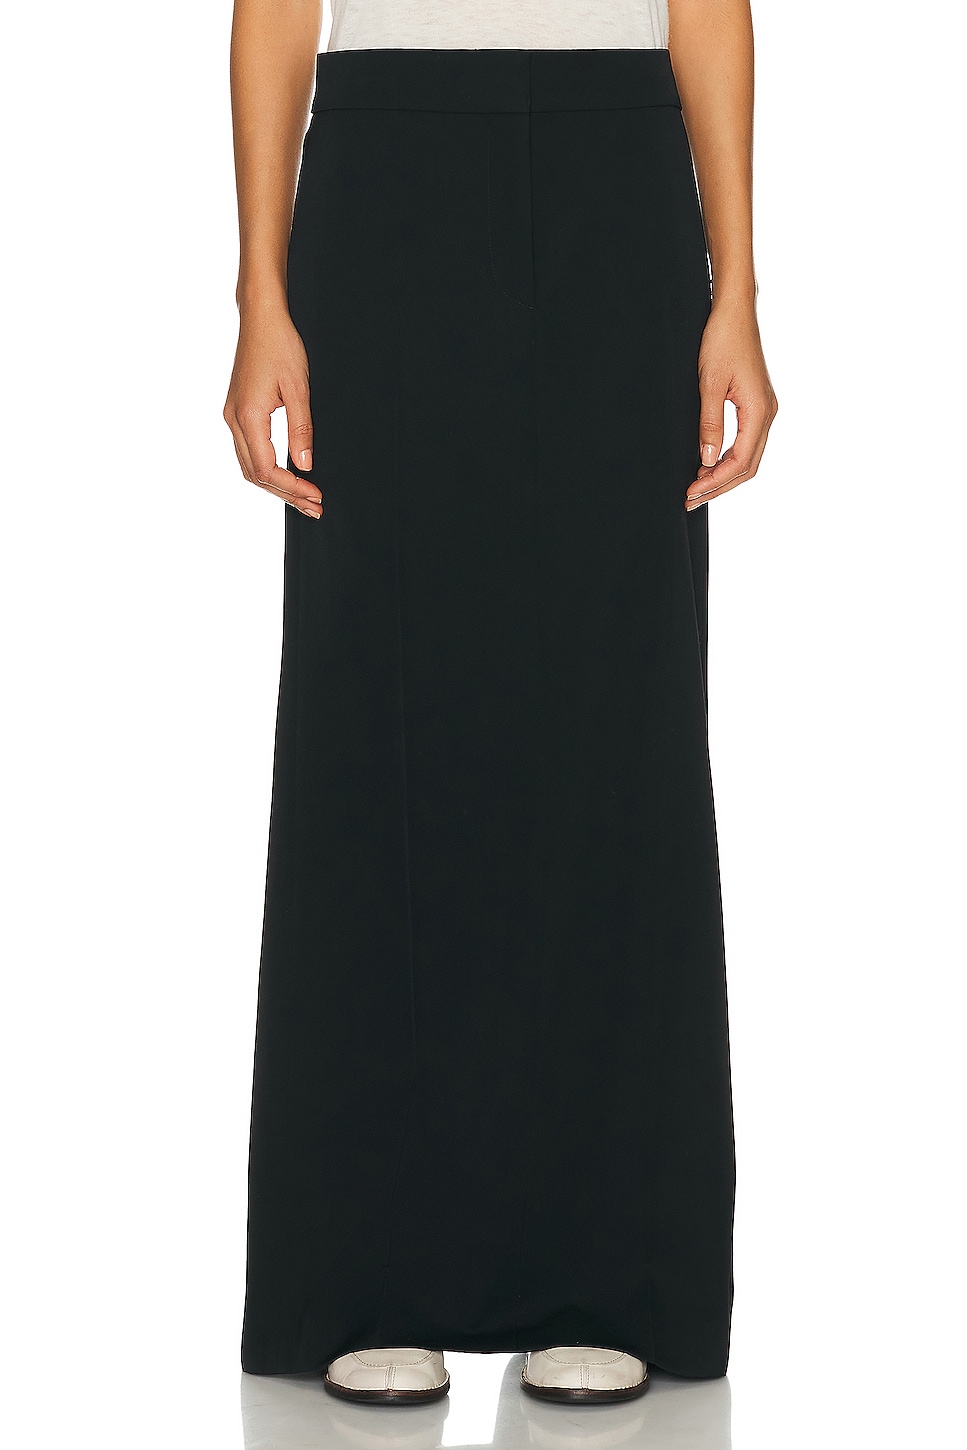 Image 1 of The Row Trevy Skirt in BLACK